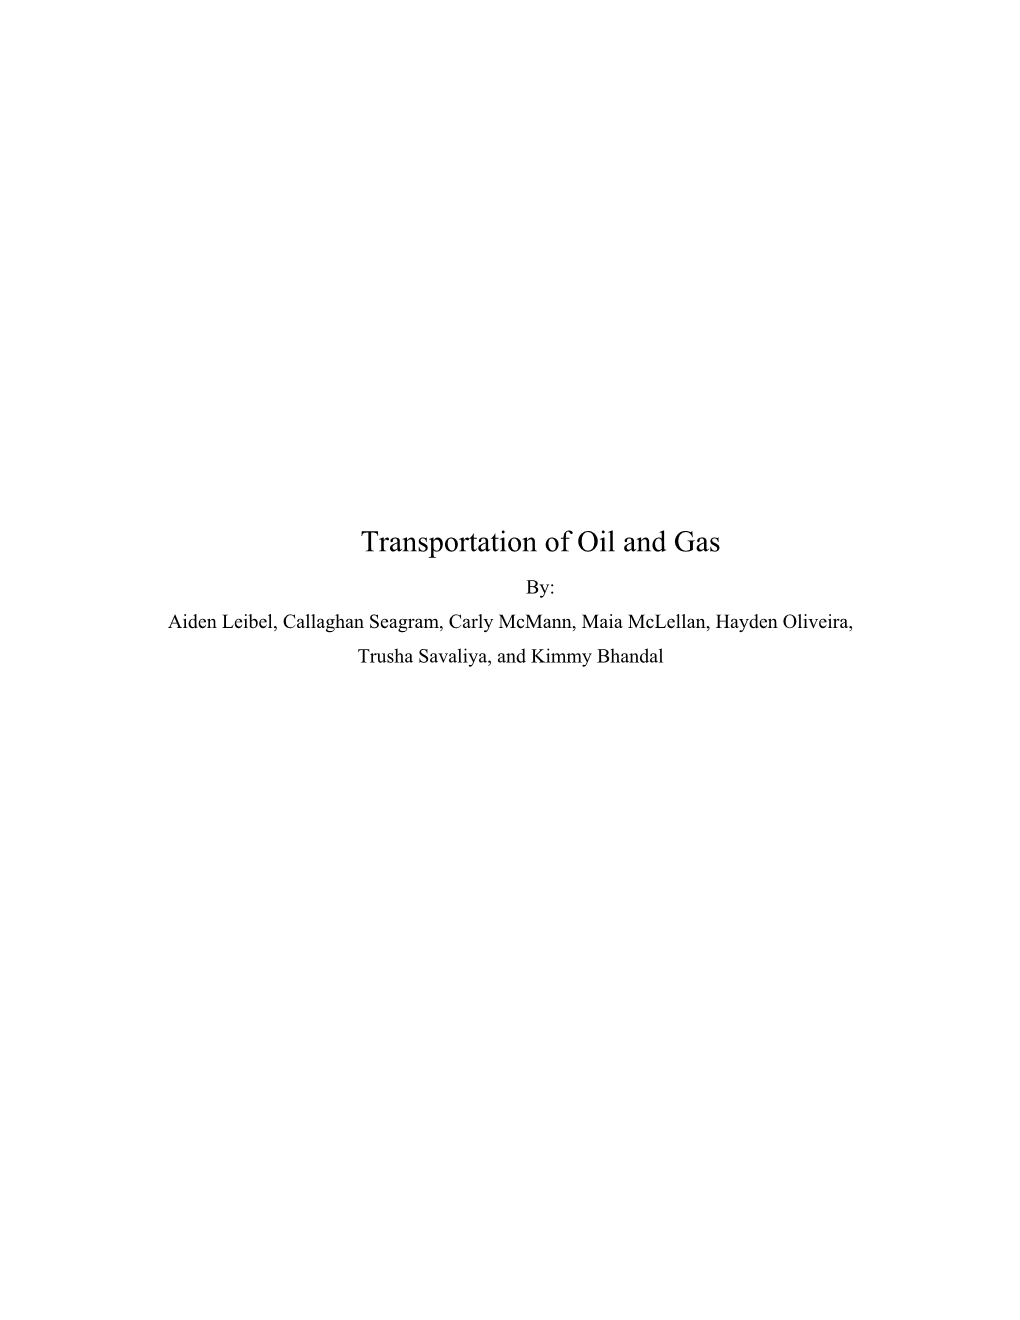 Transportation of Oil and Gas By: Aiden Leibel, Callaghan Seagram, Carly Mcmann, Maia Mclellan, Hayden Oliveira, Trusha Savaliya, and Kimmy Bhandal